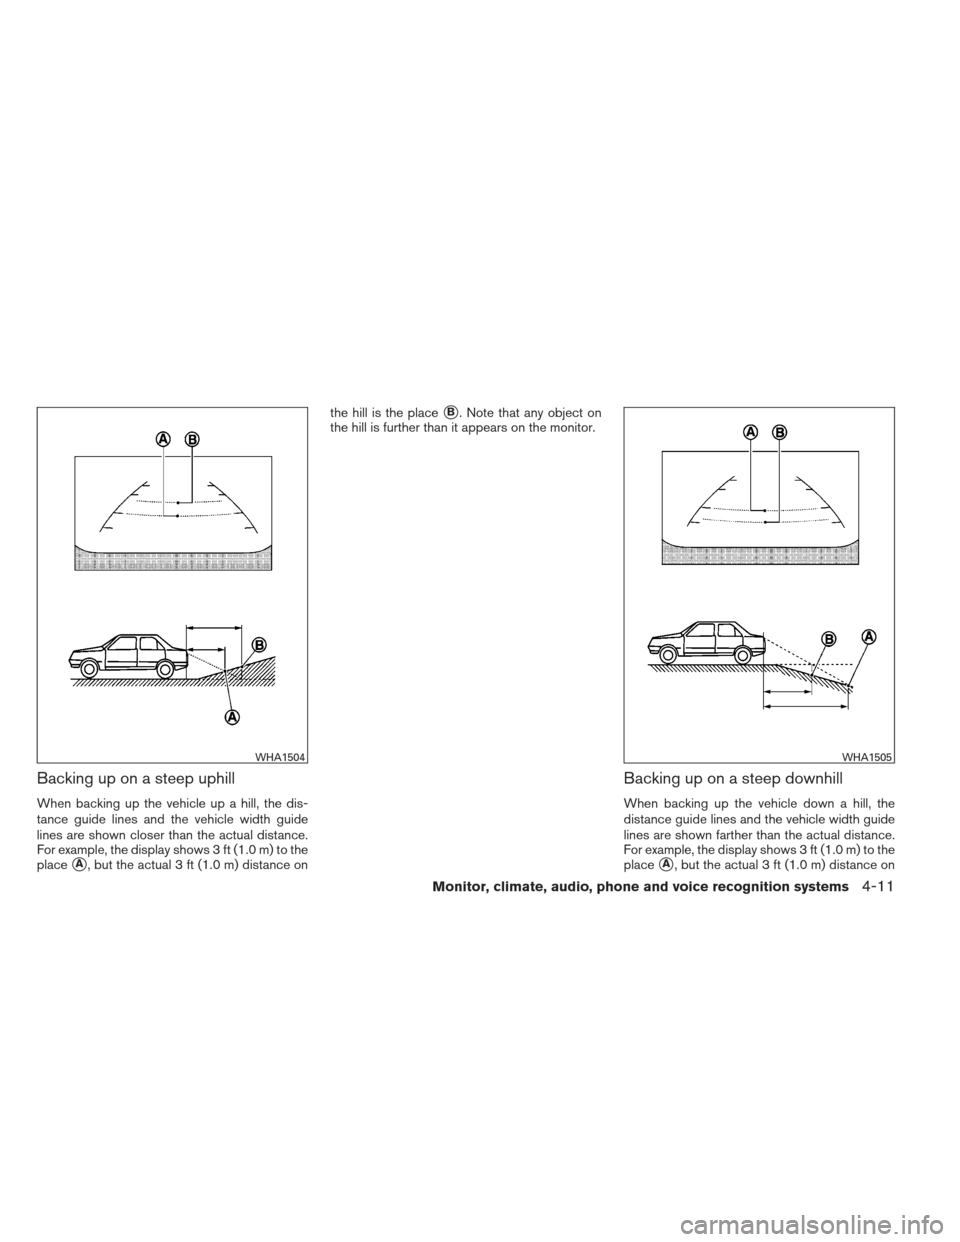 NISSAN SENTRA 2013 B17 / 7.G Owners Manual Backing up on a steep uphill
When backing up the vehicle up a hill, the dis-
tance guide lines and the vehicle width guide
lines are shown closer than the actual distance.
For example, the display sho